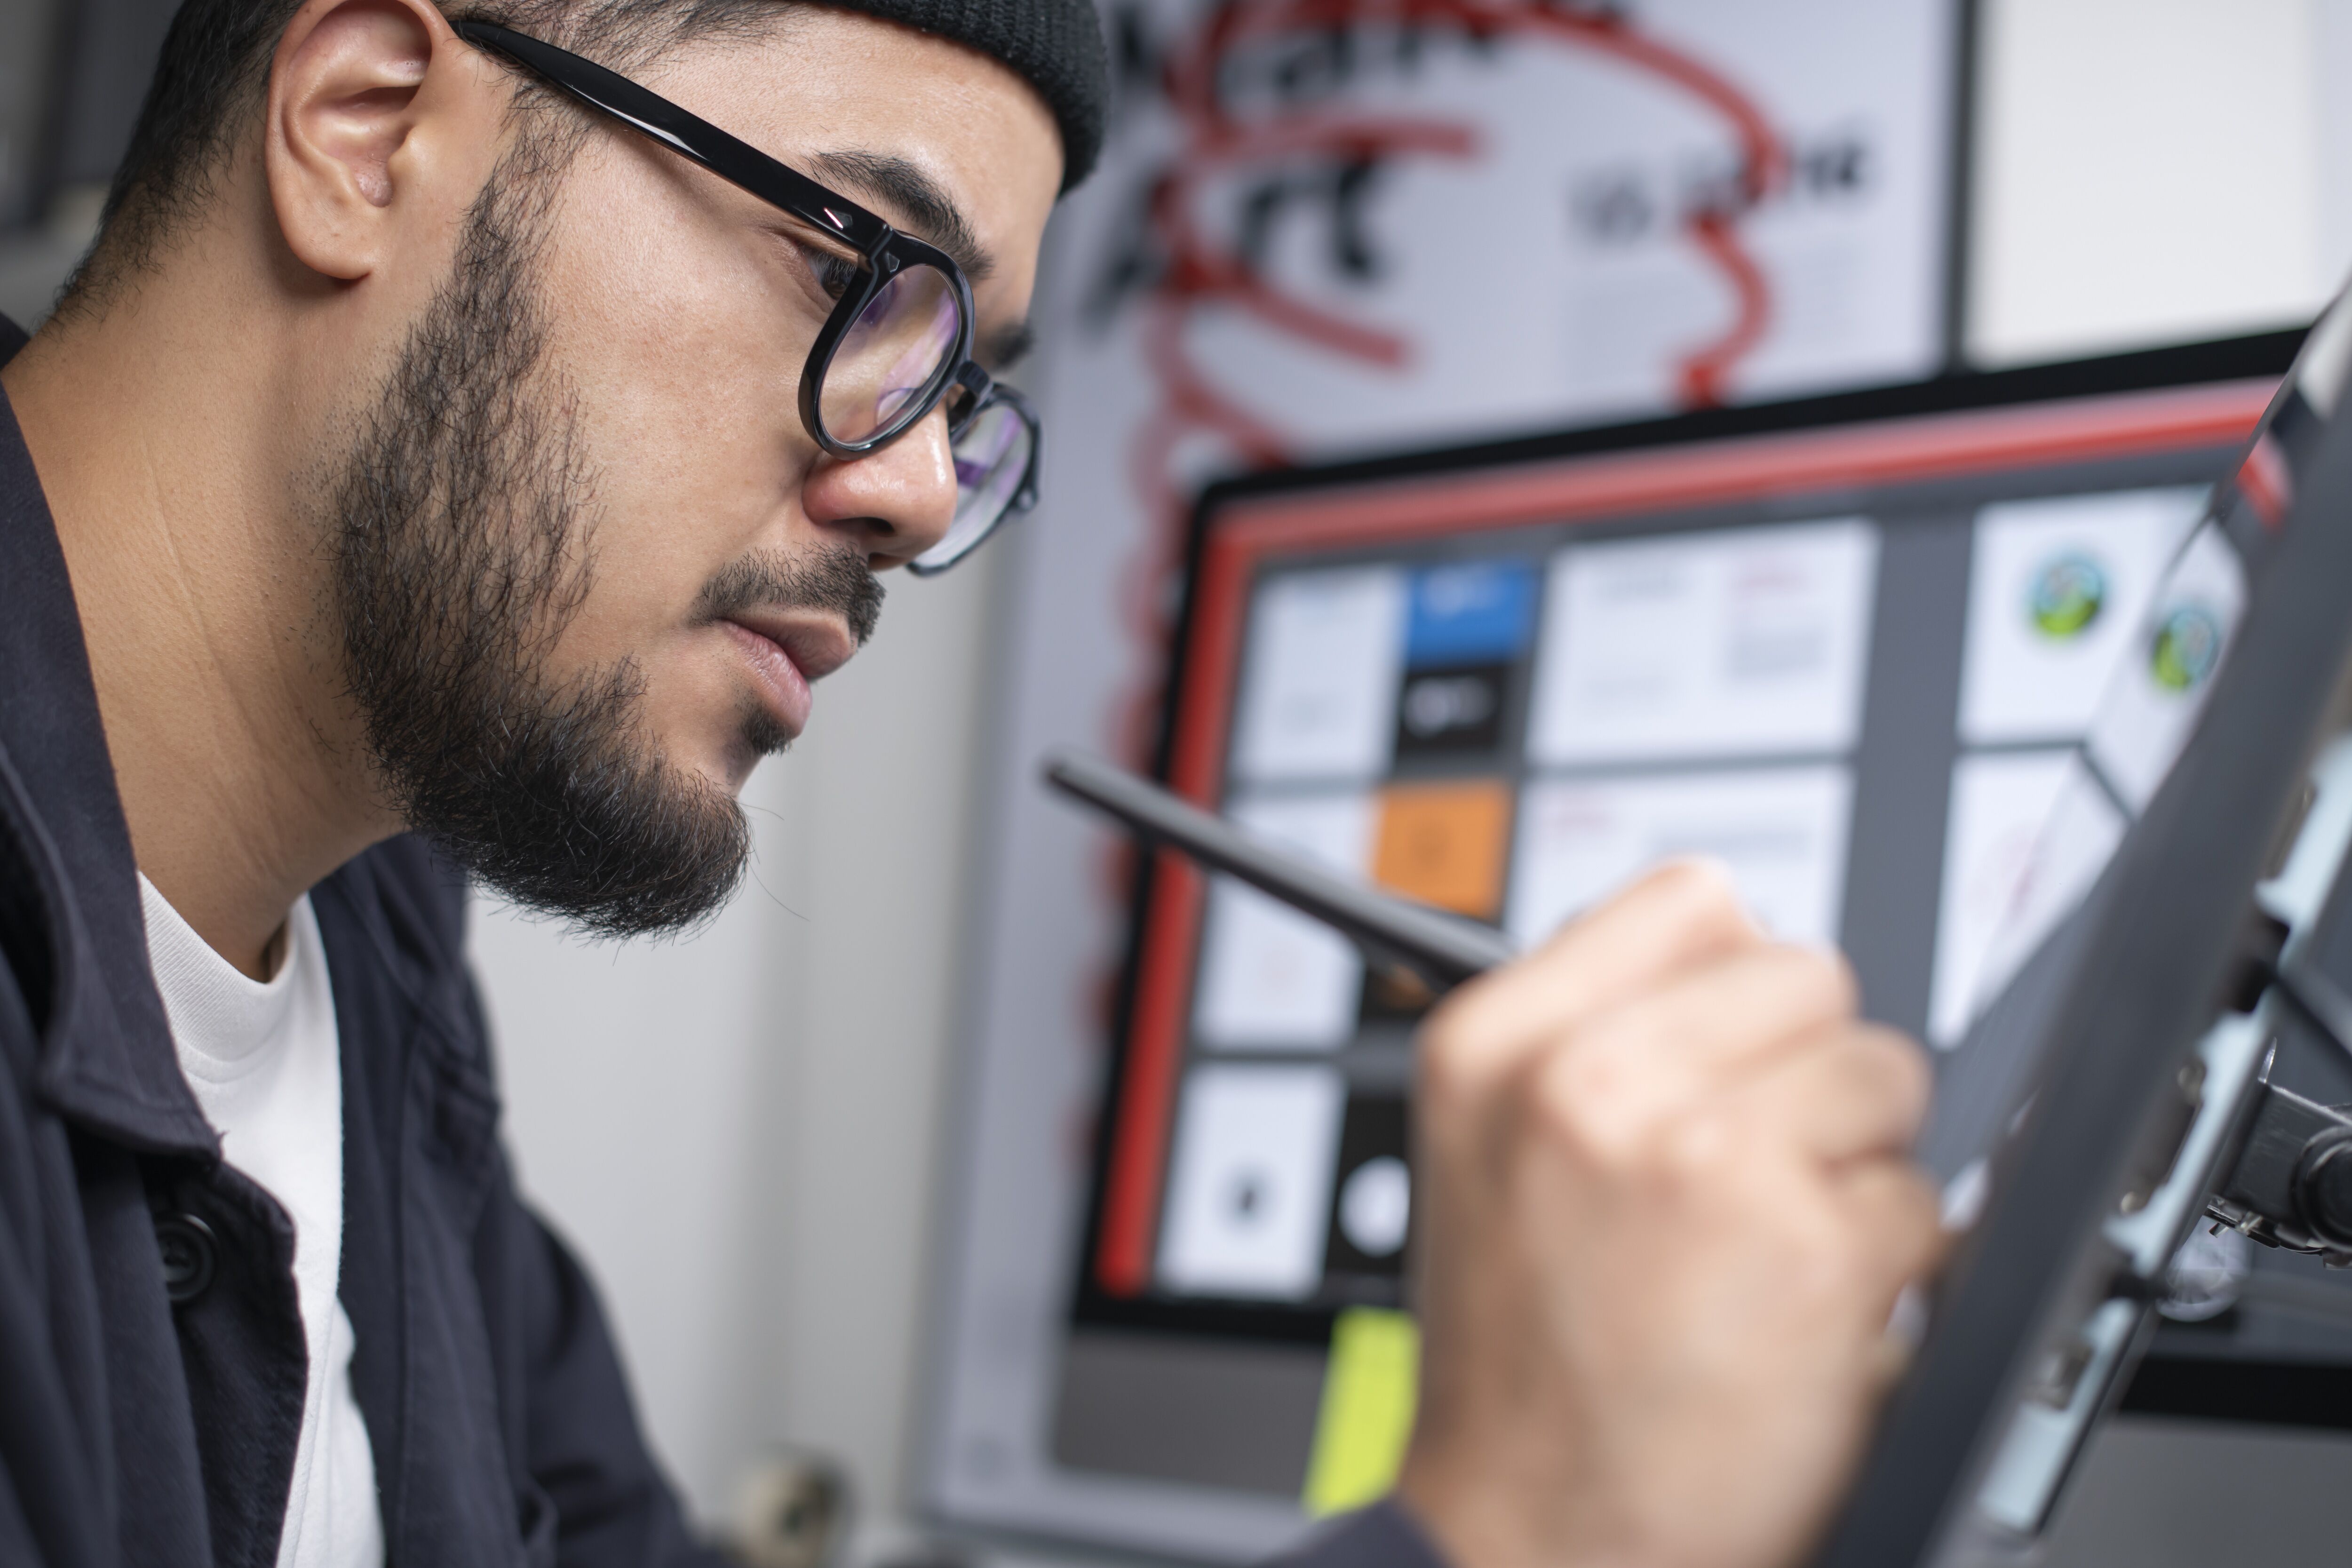 A focused male graphic designer with glasses using a stylus on a digital drawing tablet in a creative workspace.